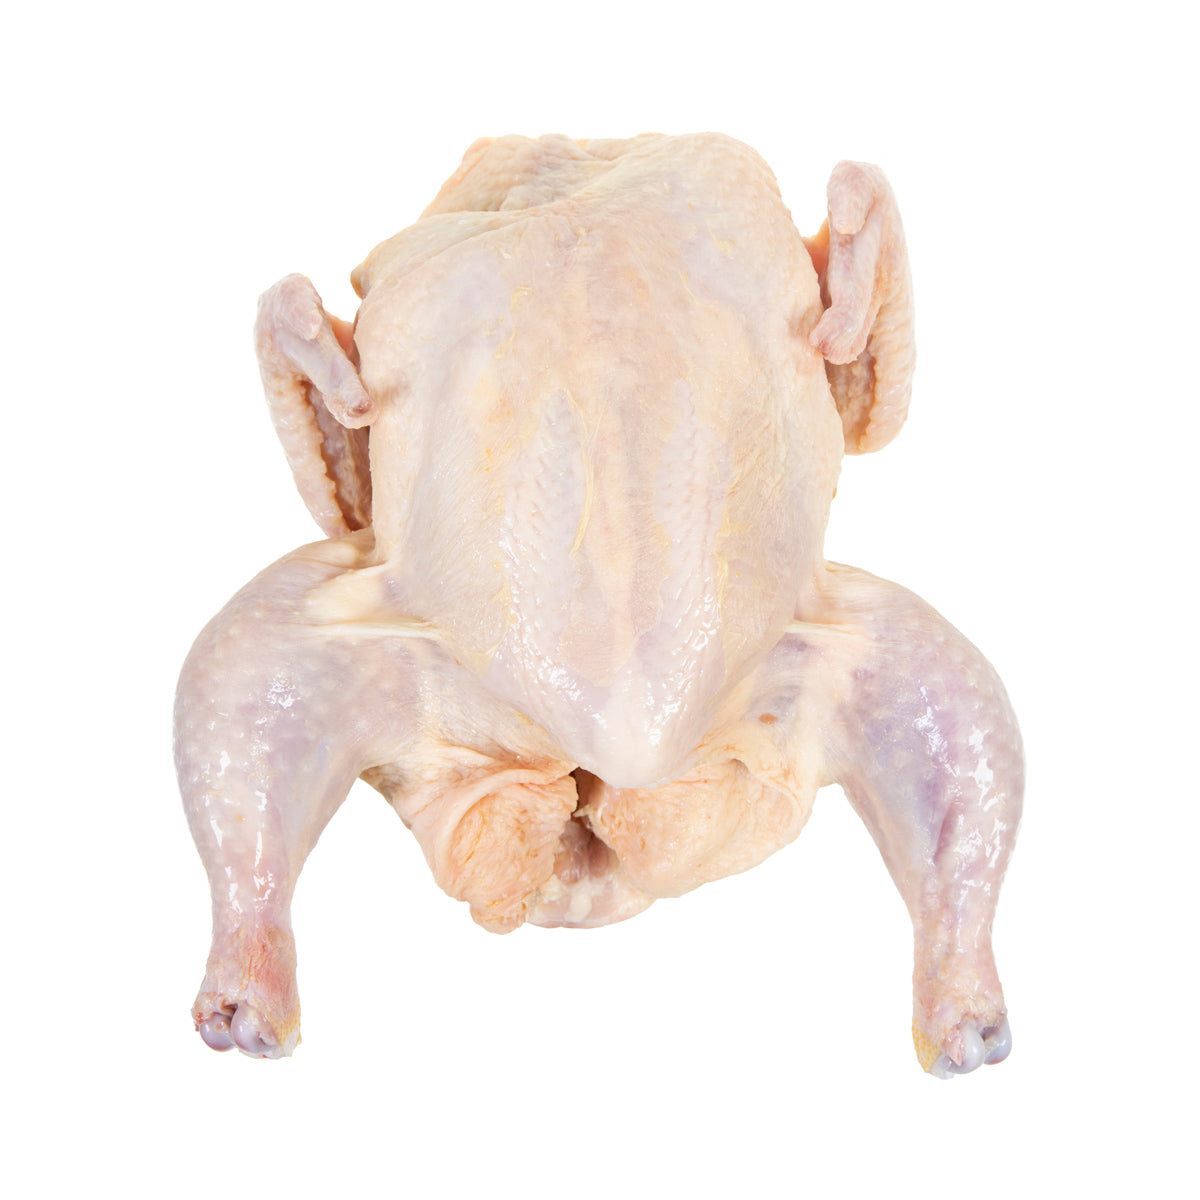 Tyson All Natural Fresh Premium Young Whole Chicken 6.5lb 12ct